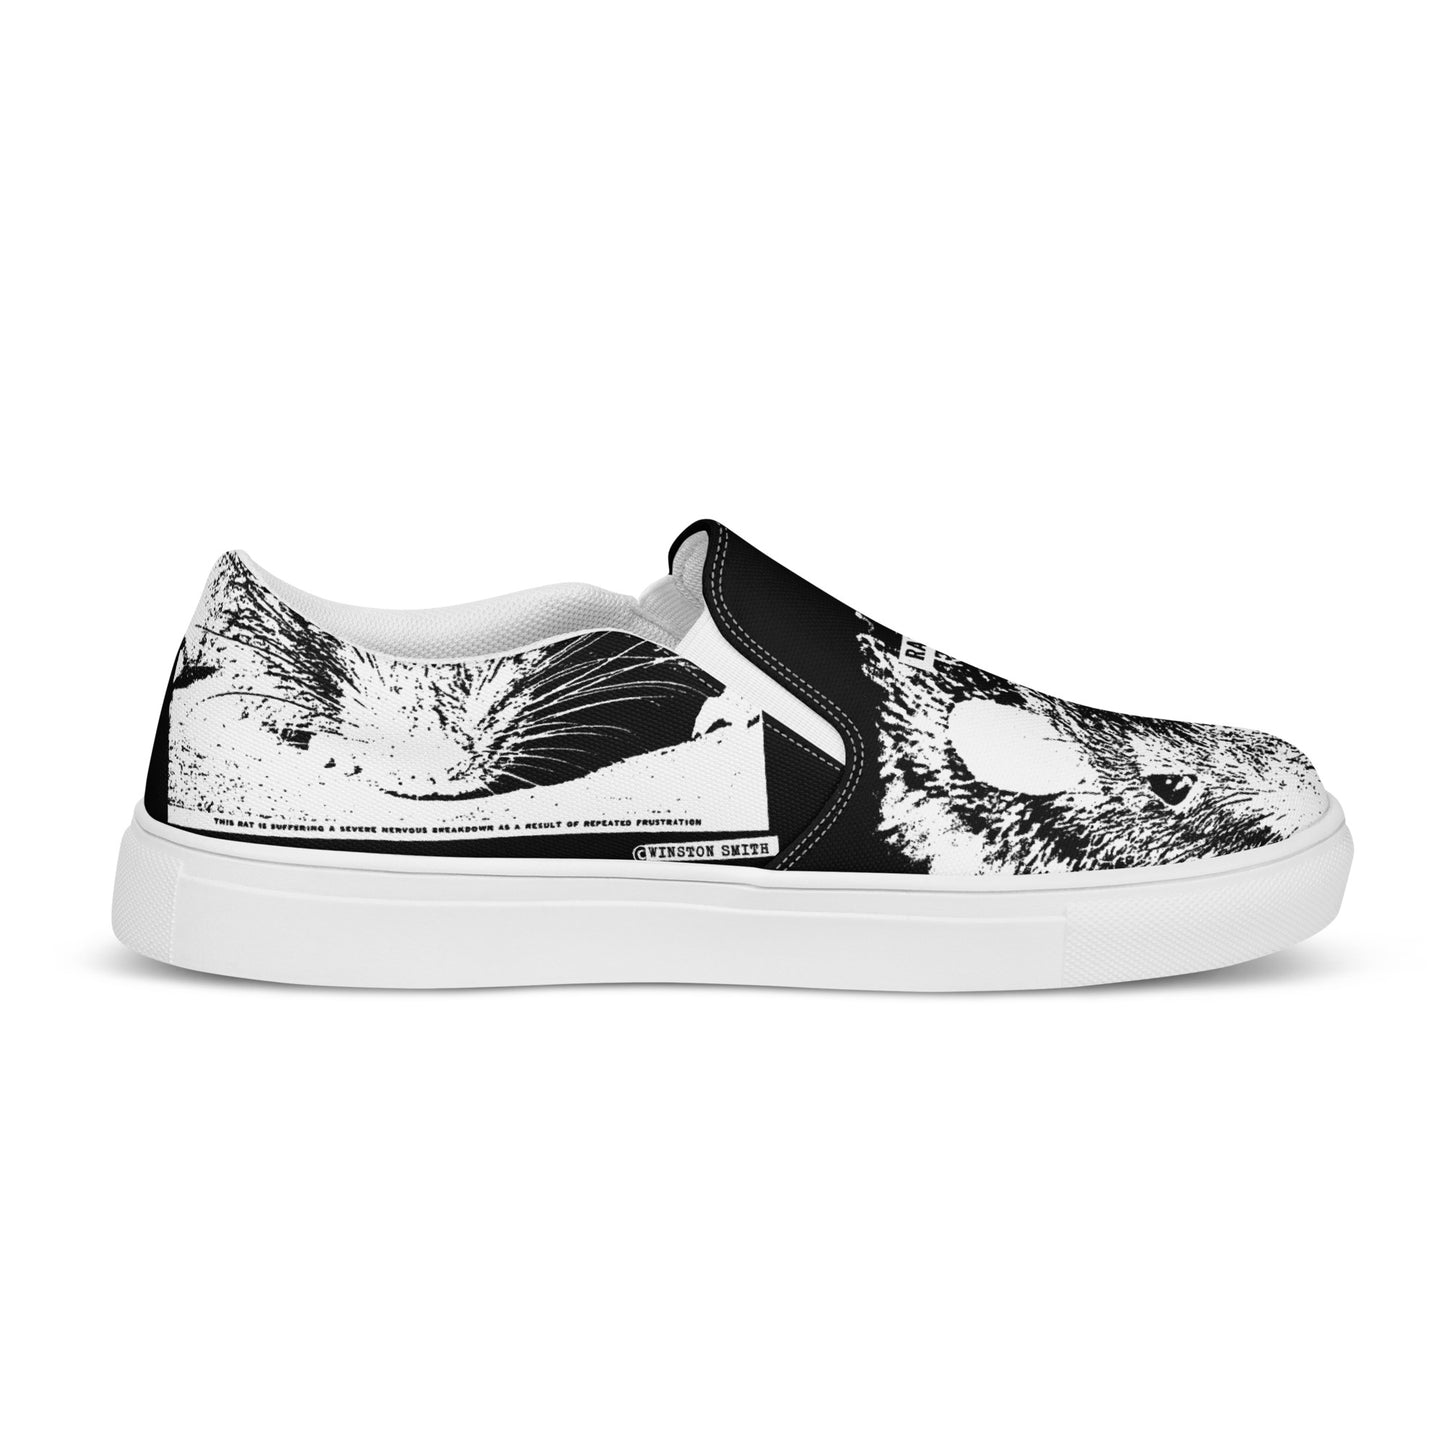 Winston Smith "Insoluble Problems" Women’s slip-on canvas shoes